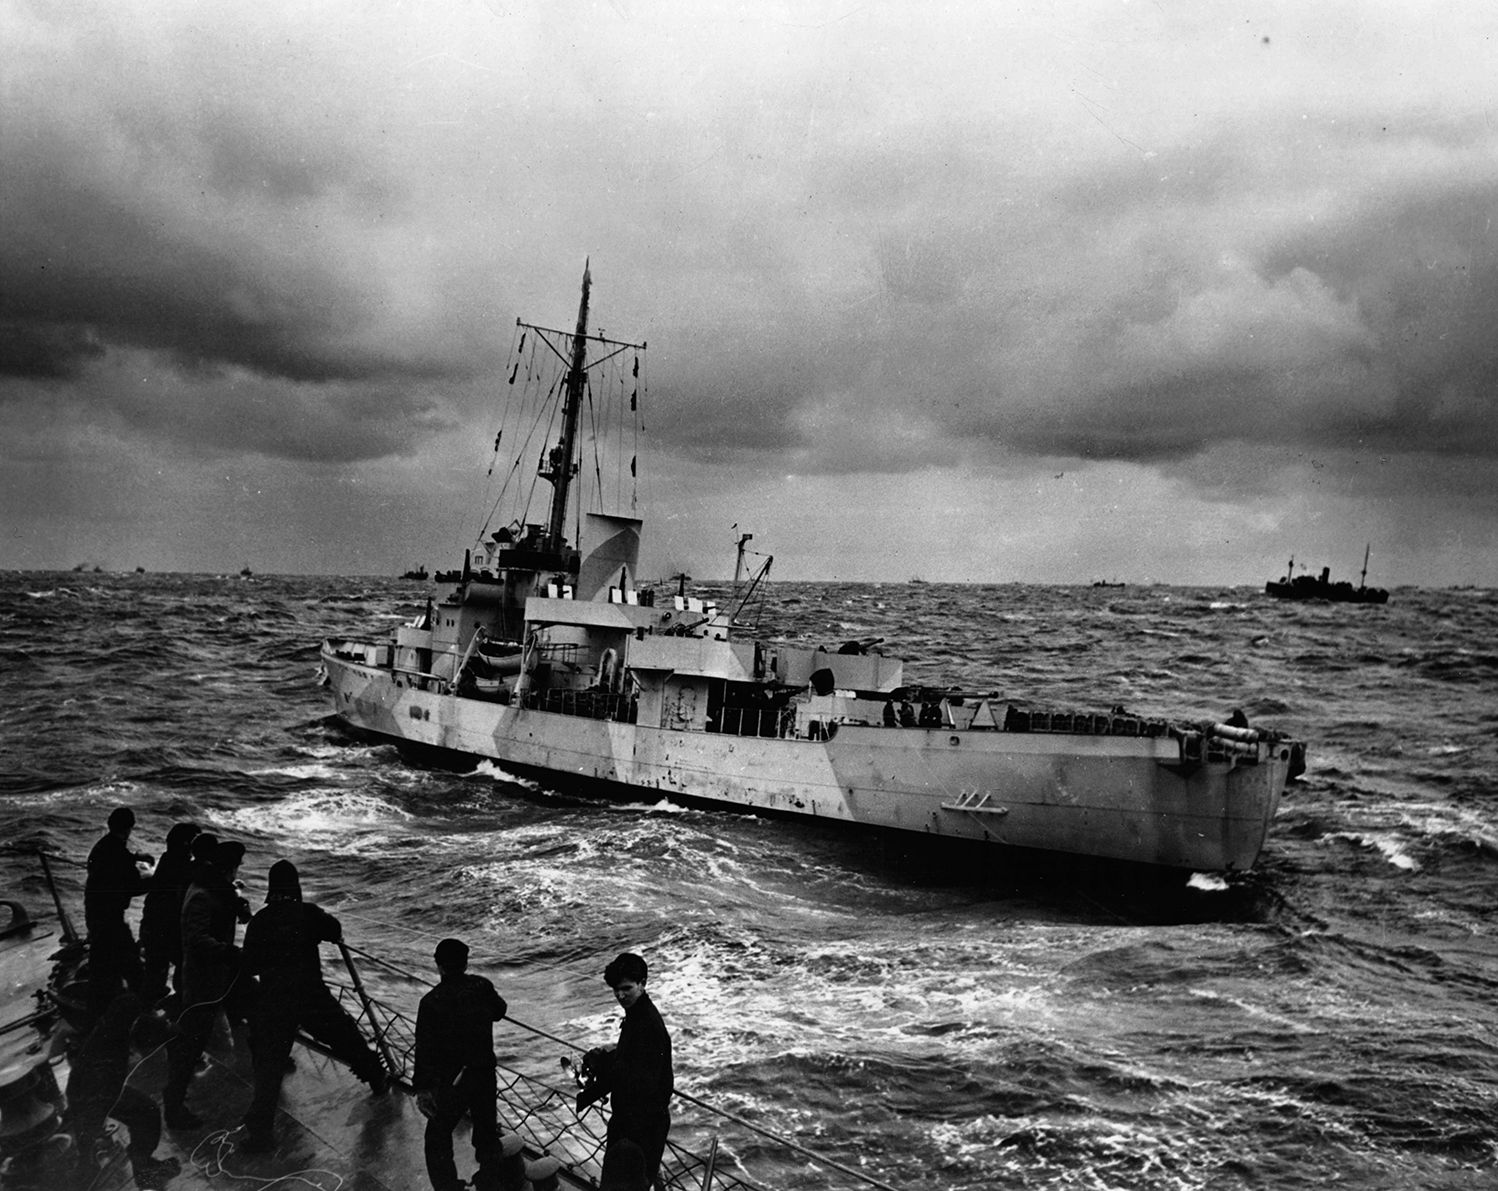 Its complement of sailors at general quarters and its decks laden with depth charges, a U.S. Coast Guard cutter rides swells in the Atlantic Ocean while on convoy escort duty, protecting merchant ships loaded with supplies and equipment for the war in Europe.